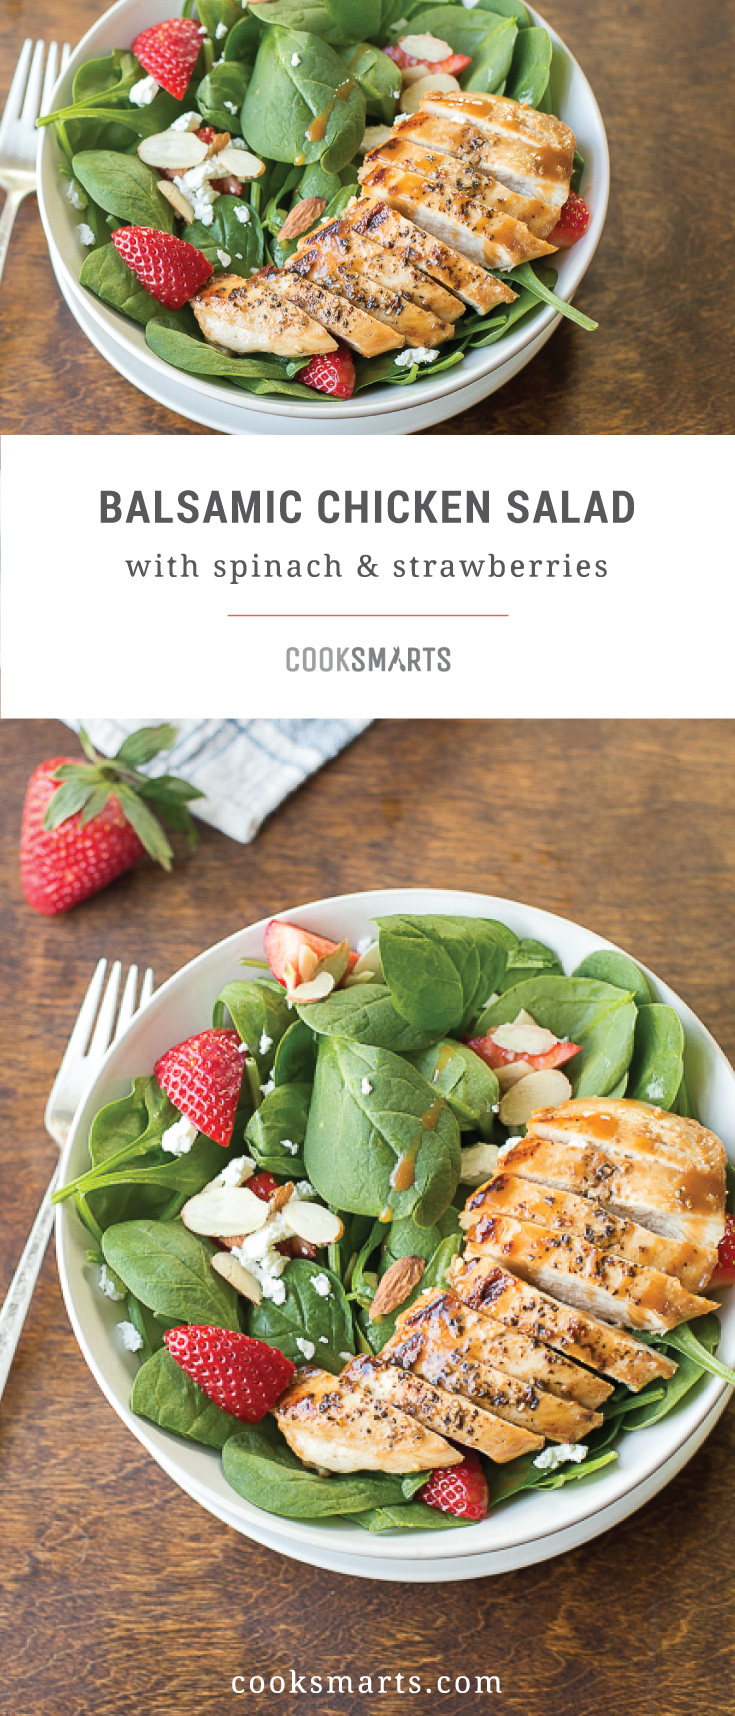 Balsamic Chicken and Spinach Salad Recipe | Cook Smarts